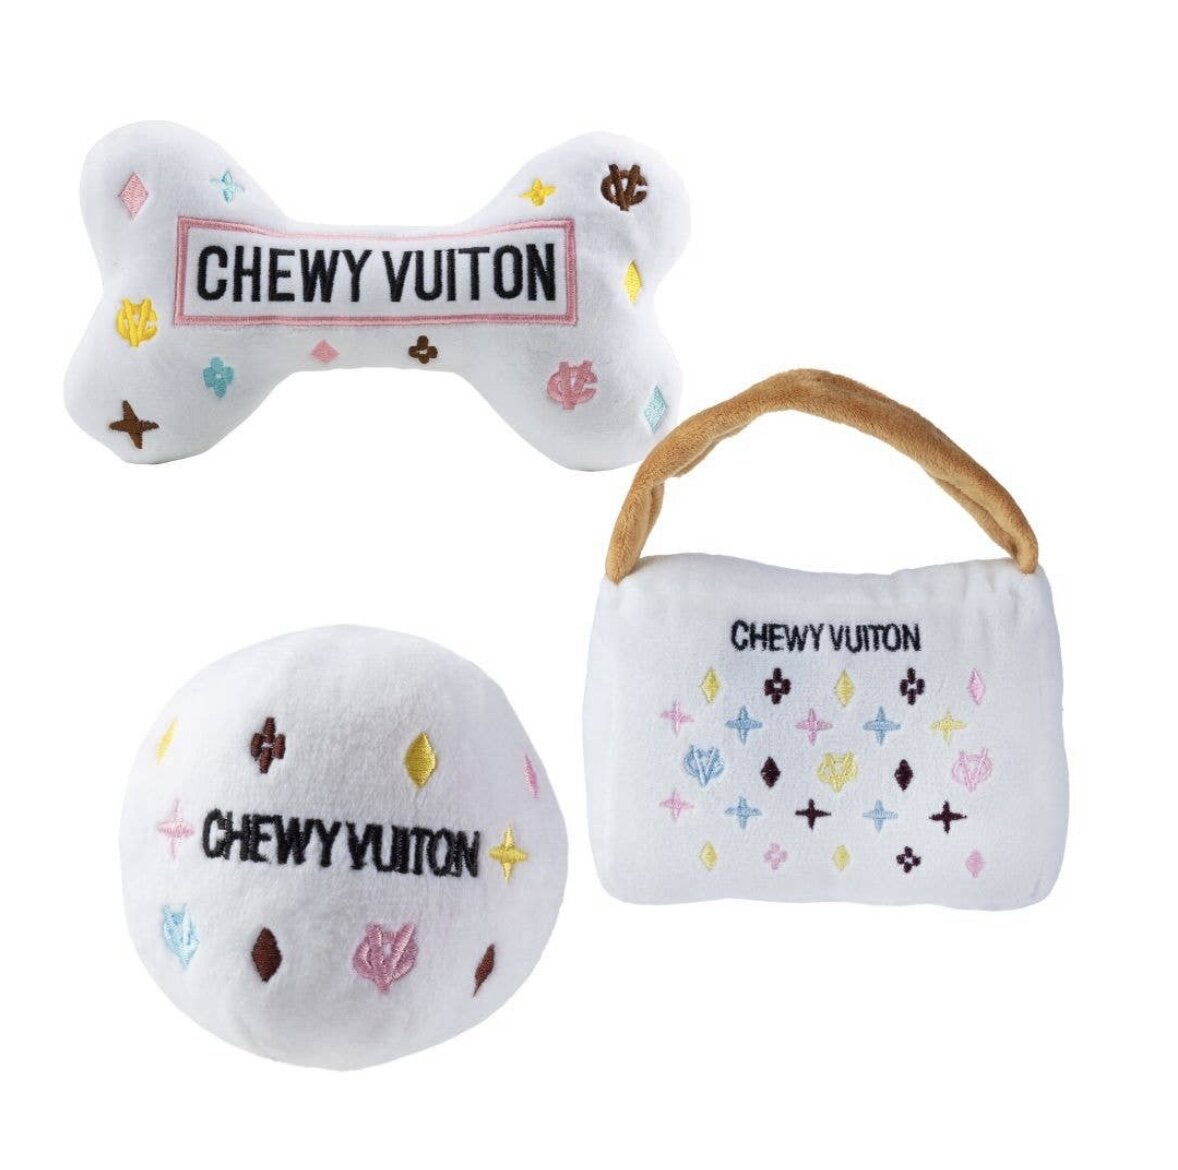 White Chewy Vuitton Dog Toy Purse